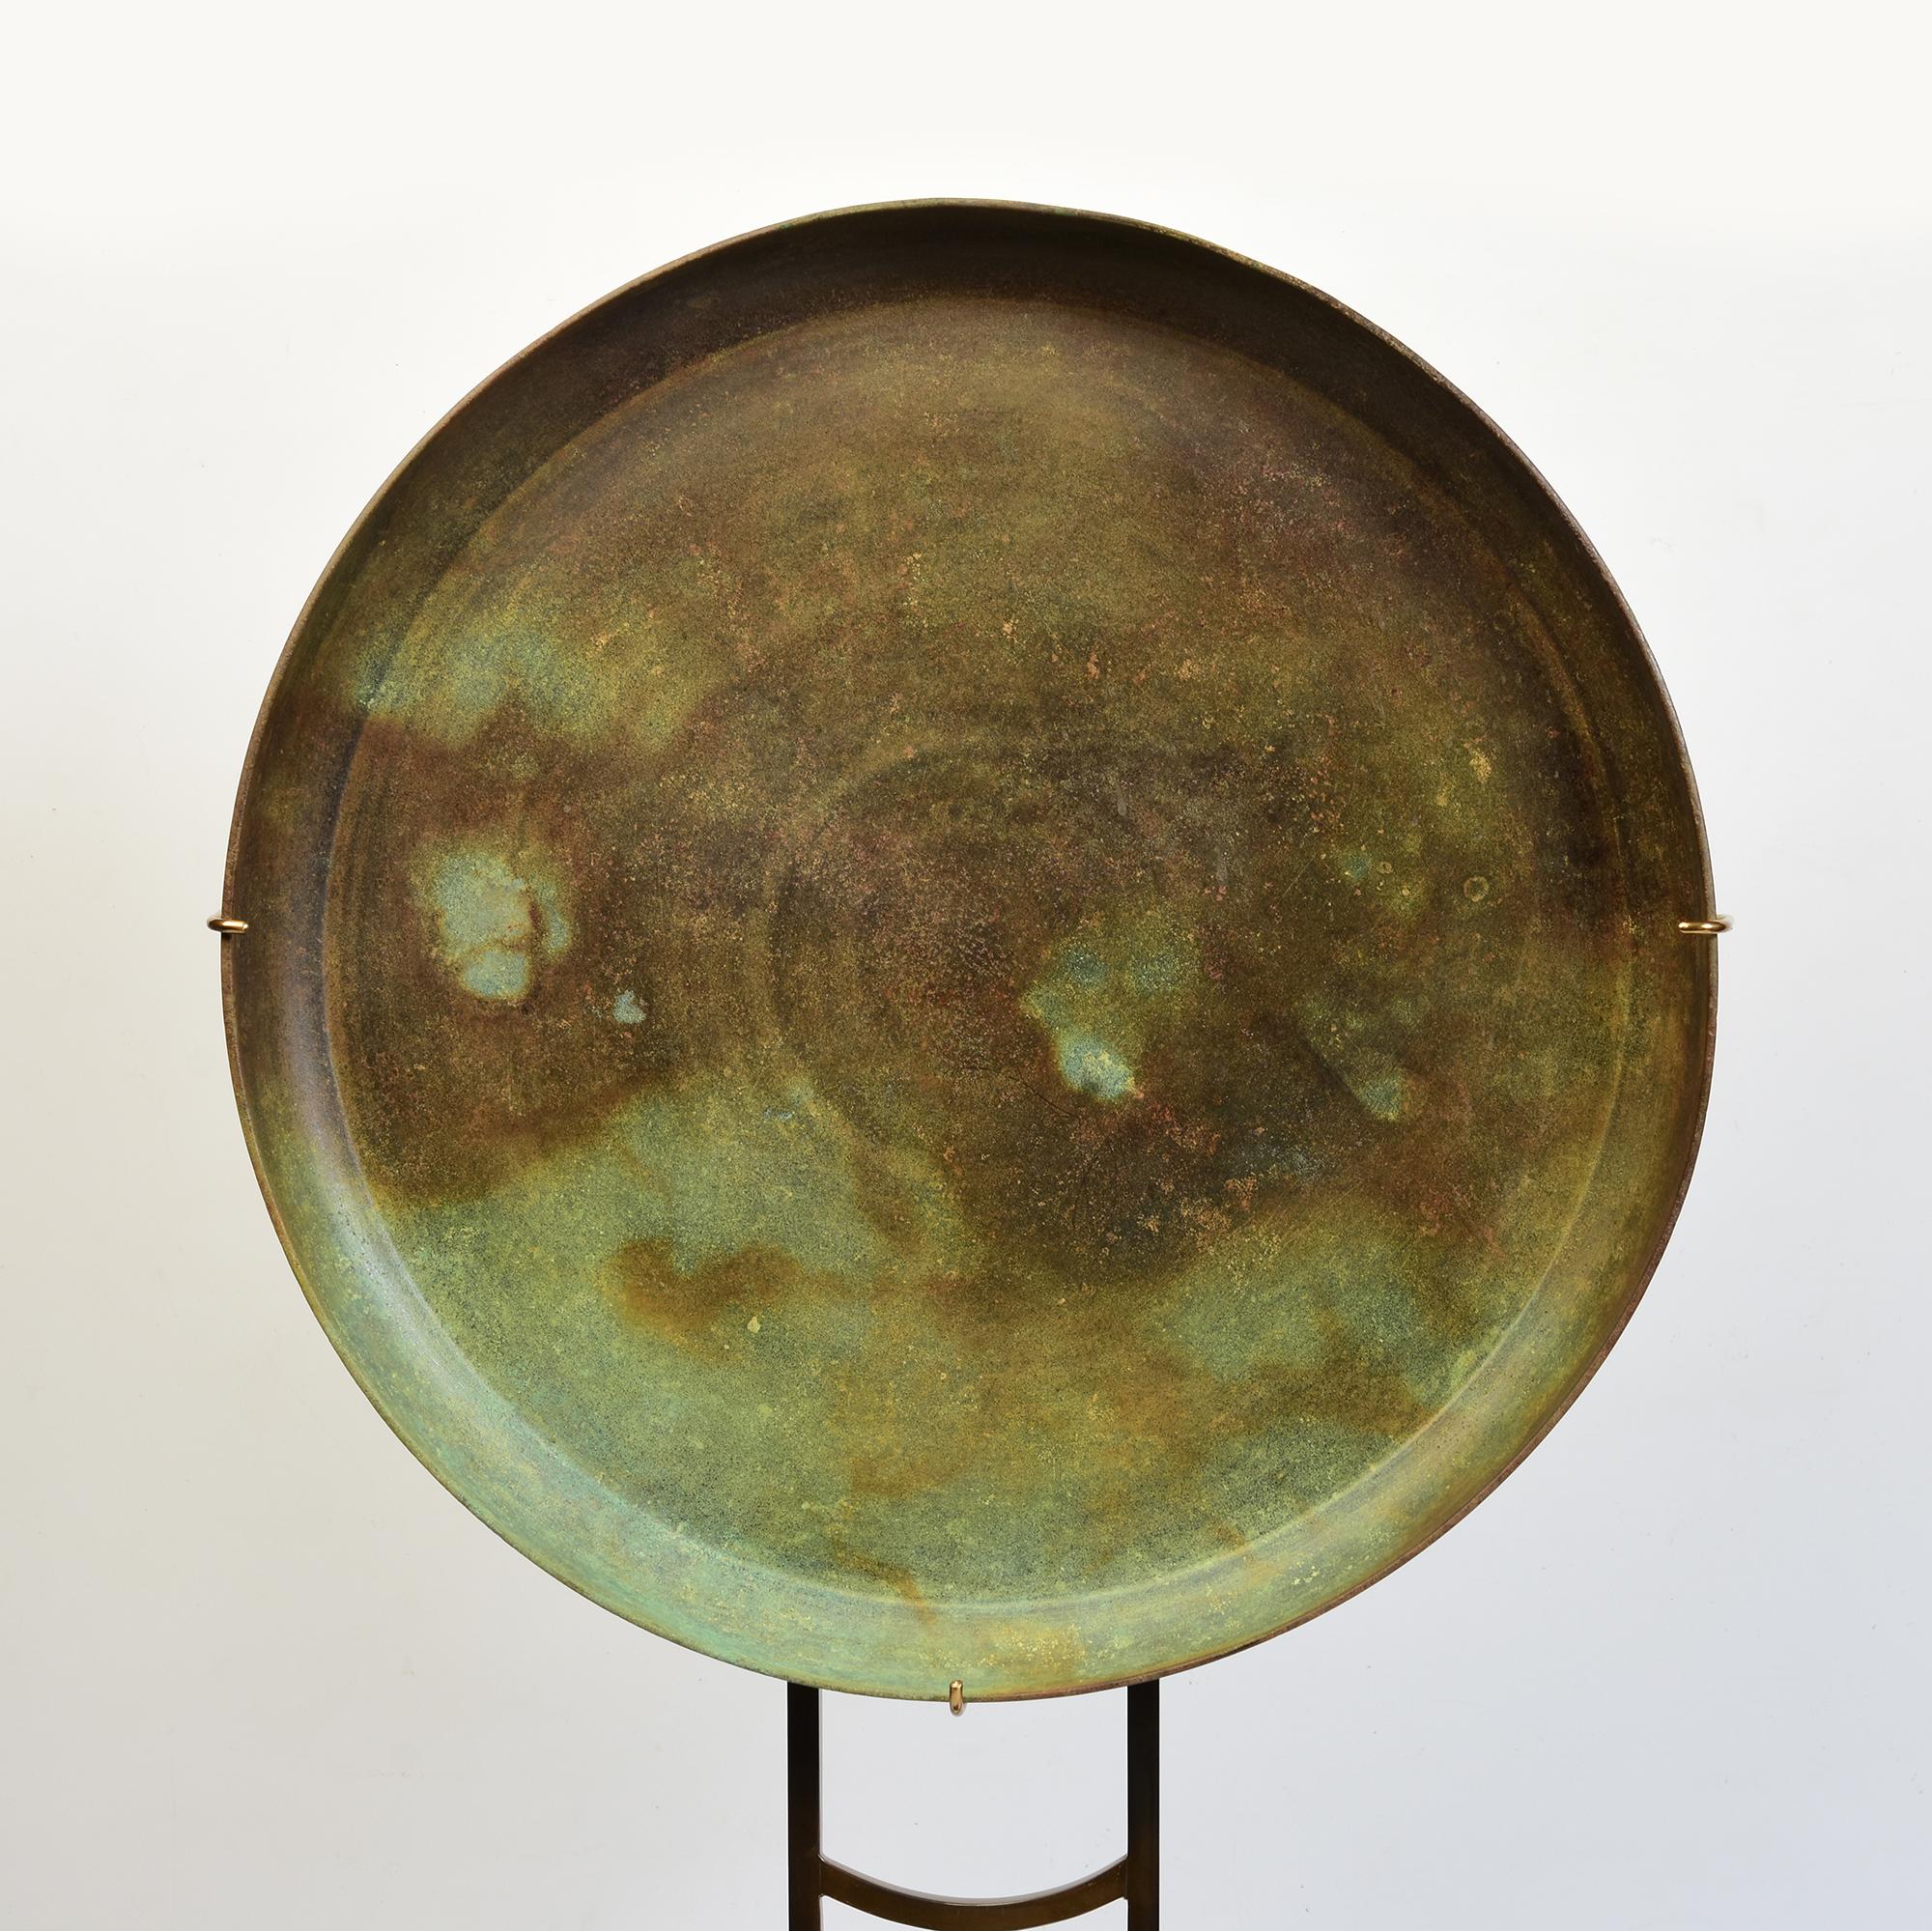 Antique Khmer bronze tray with nice green patina with stand.

Age: Cambodia, Angkor Vat Period, 12th Century
Size of tray only: Diameter 35.1 C.M. / Thickness 3.2 C.M.
Height including stand: 68 C.M.
Condition: Nice condition overall (some expected